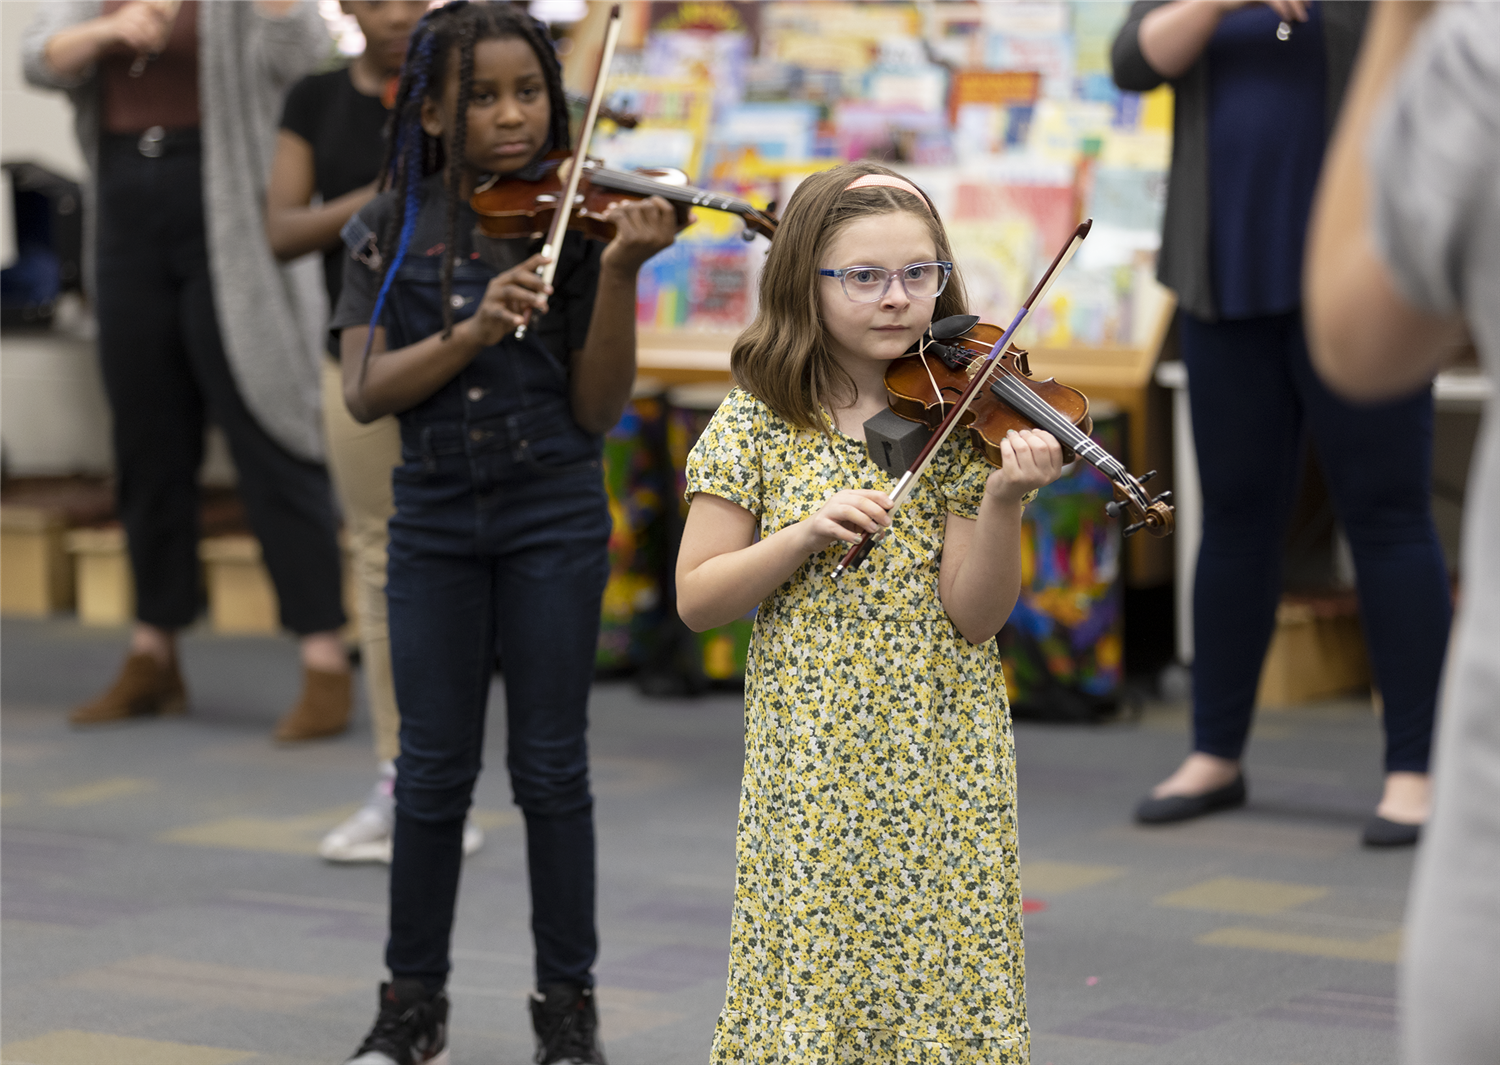 First year of Stroud Strings Program a Success